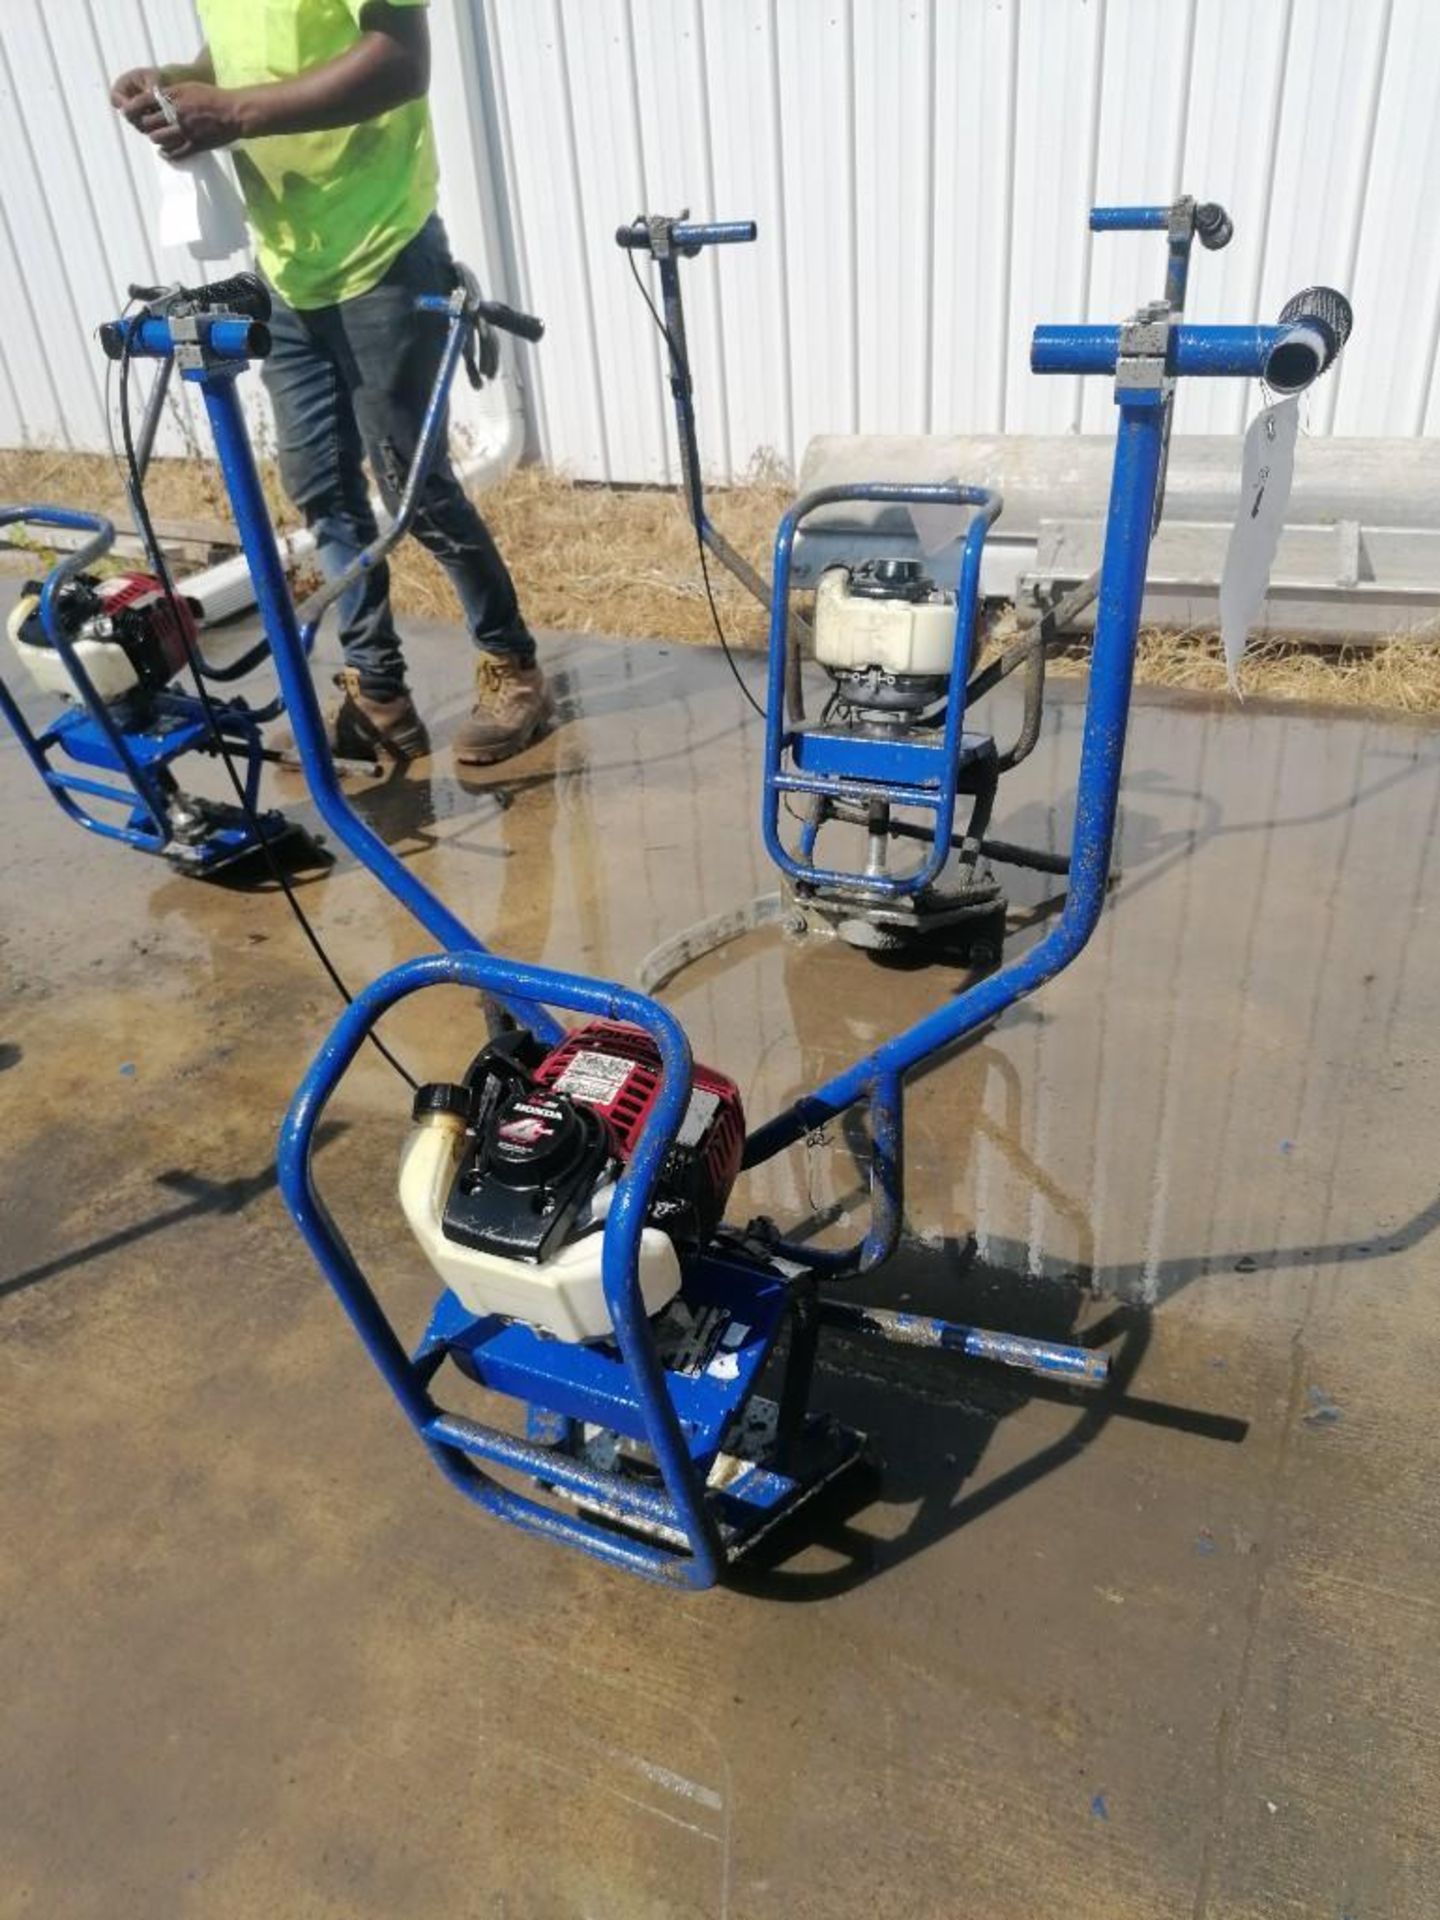 Shockwave Power Screed with Honda GX35 Motor, Serial #4233, 23.3 Hours. Located at 301 E Henry